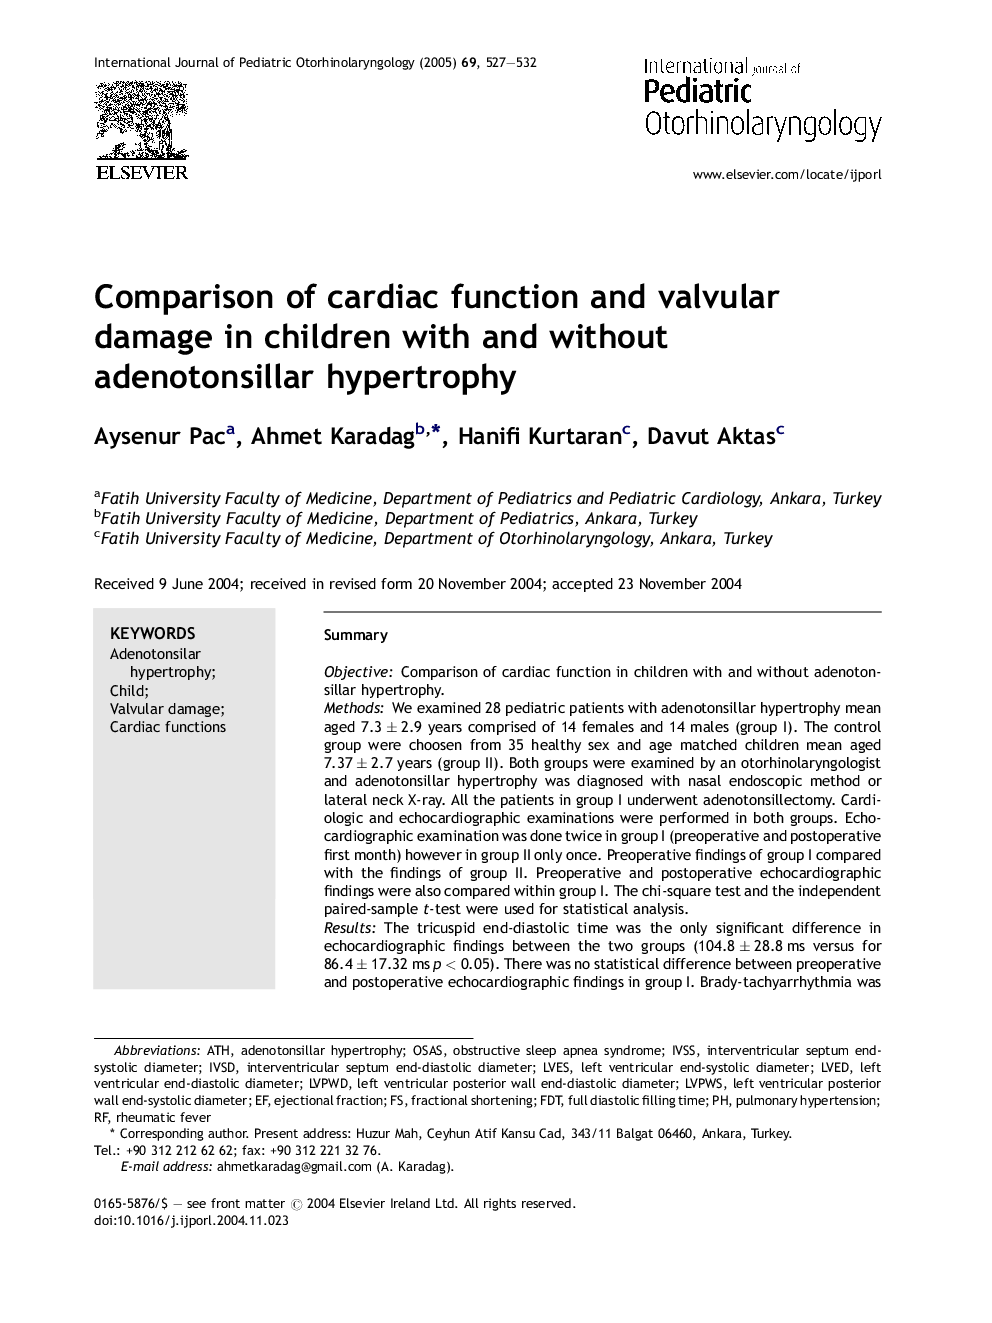 Comparison of cardiac function and valvular damage in children with and without adenotonsillar hypertrophy